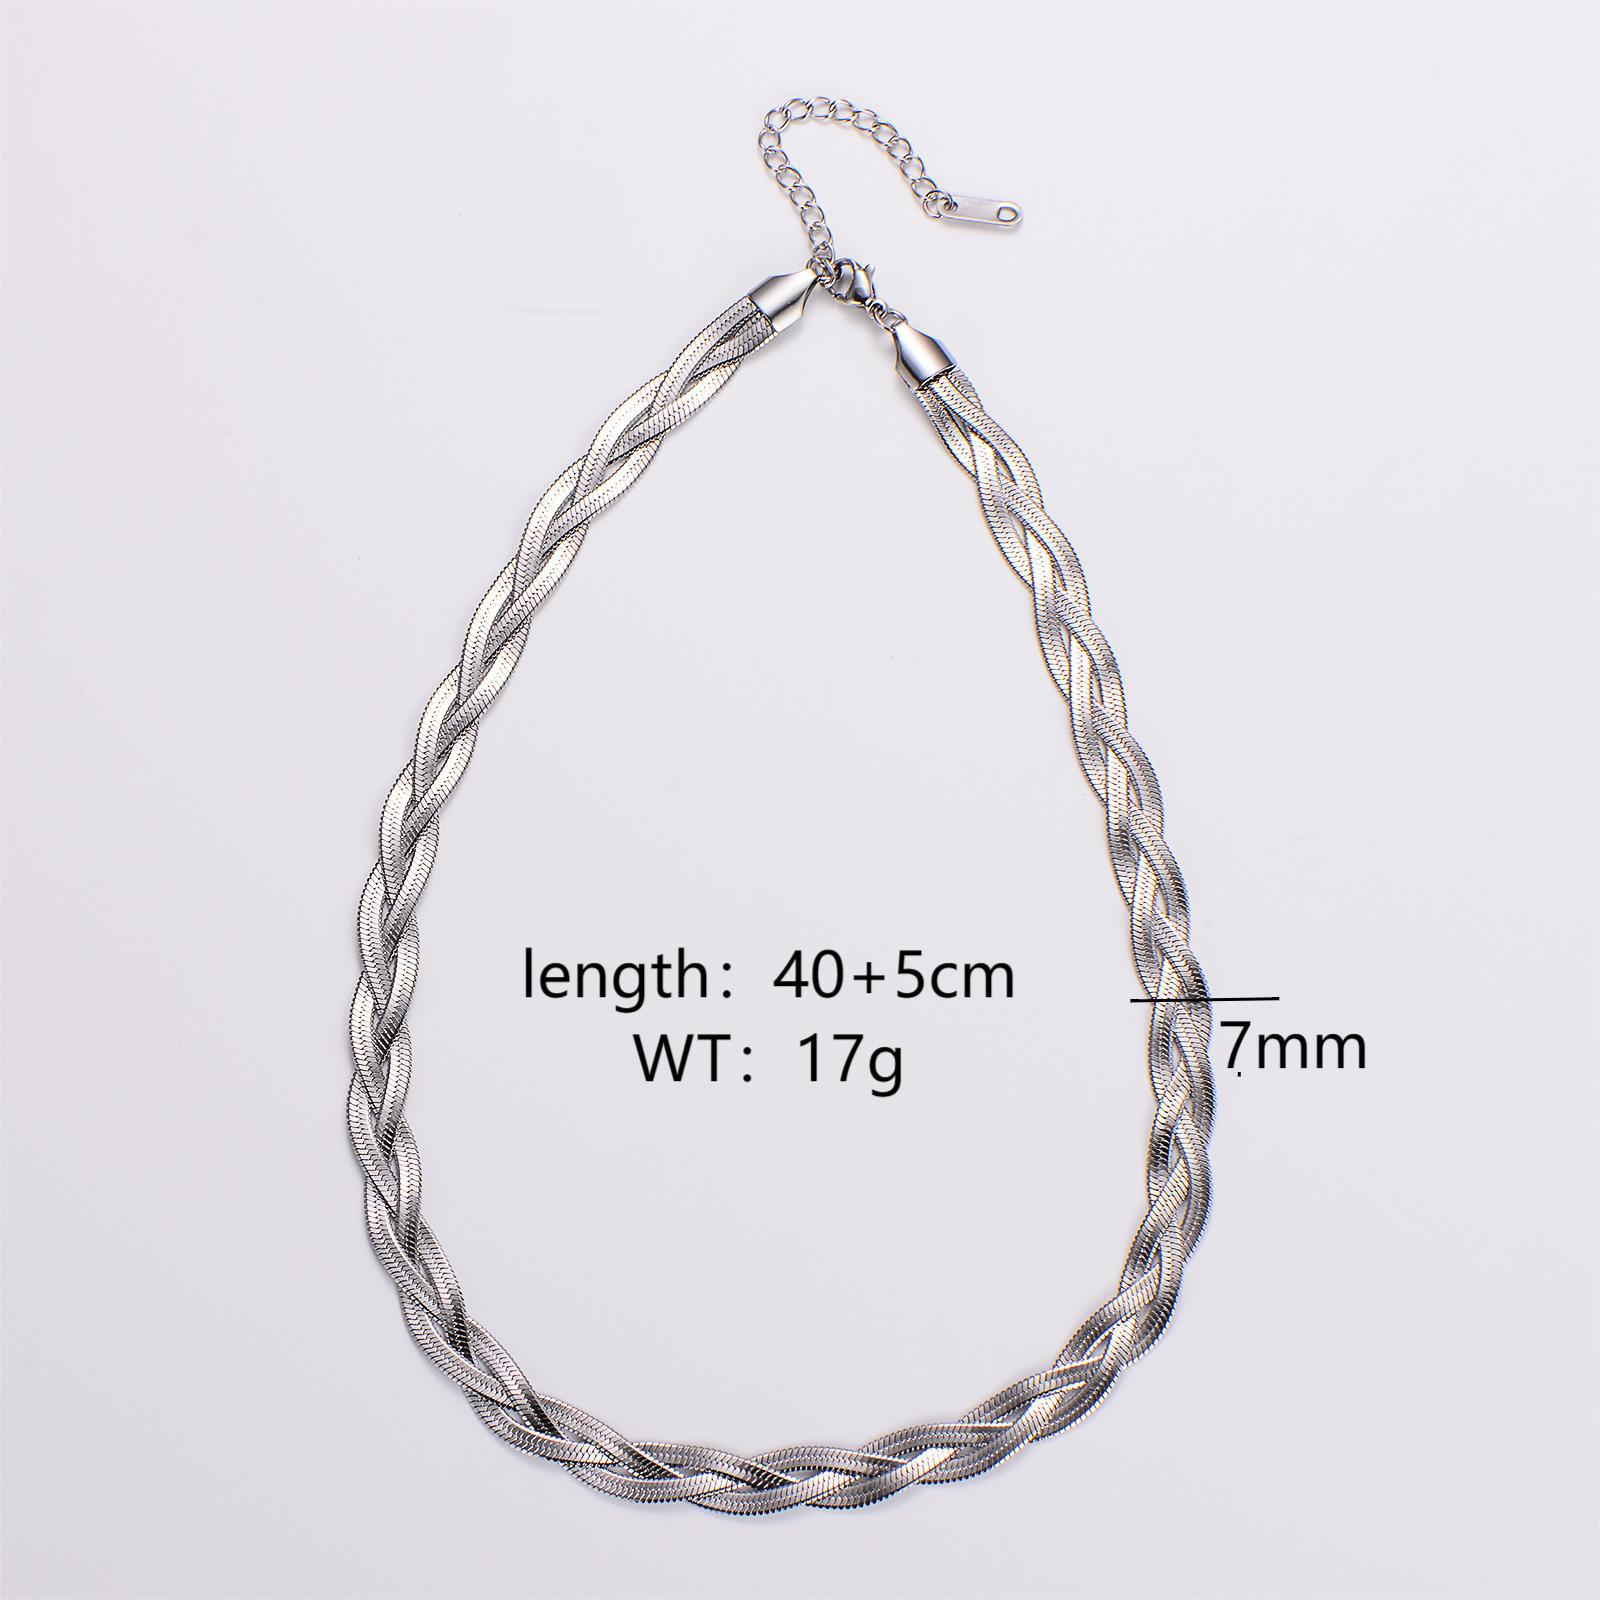 5:Steel necklace